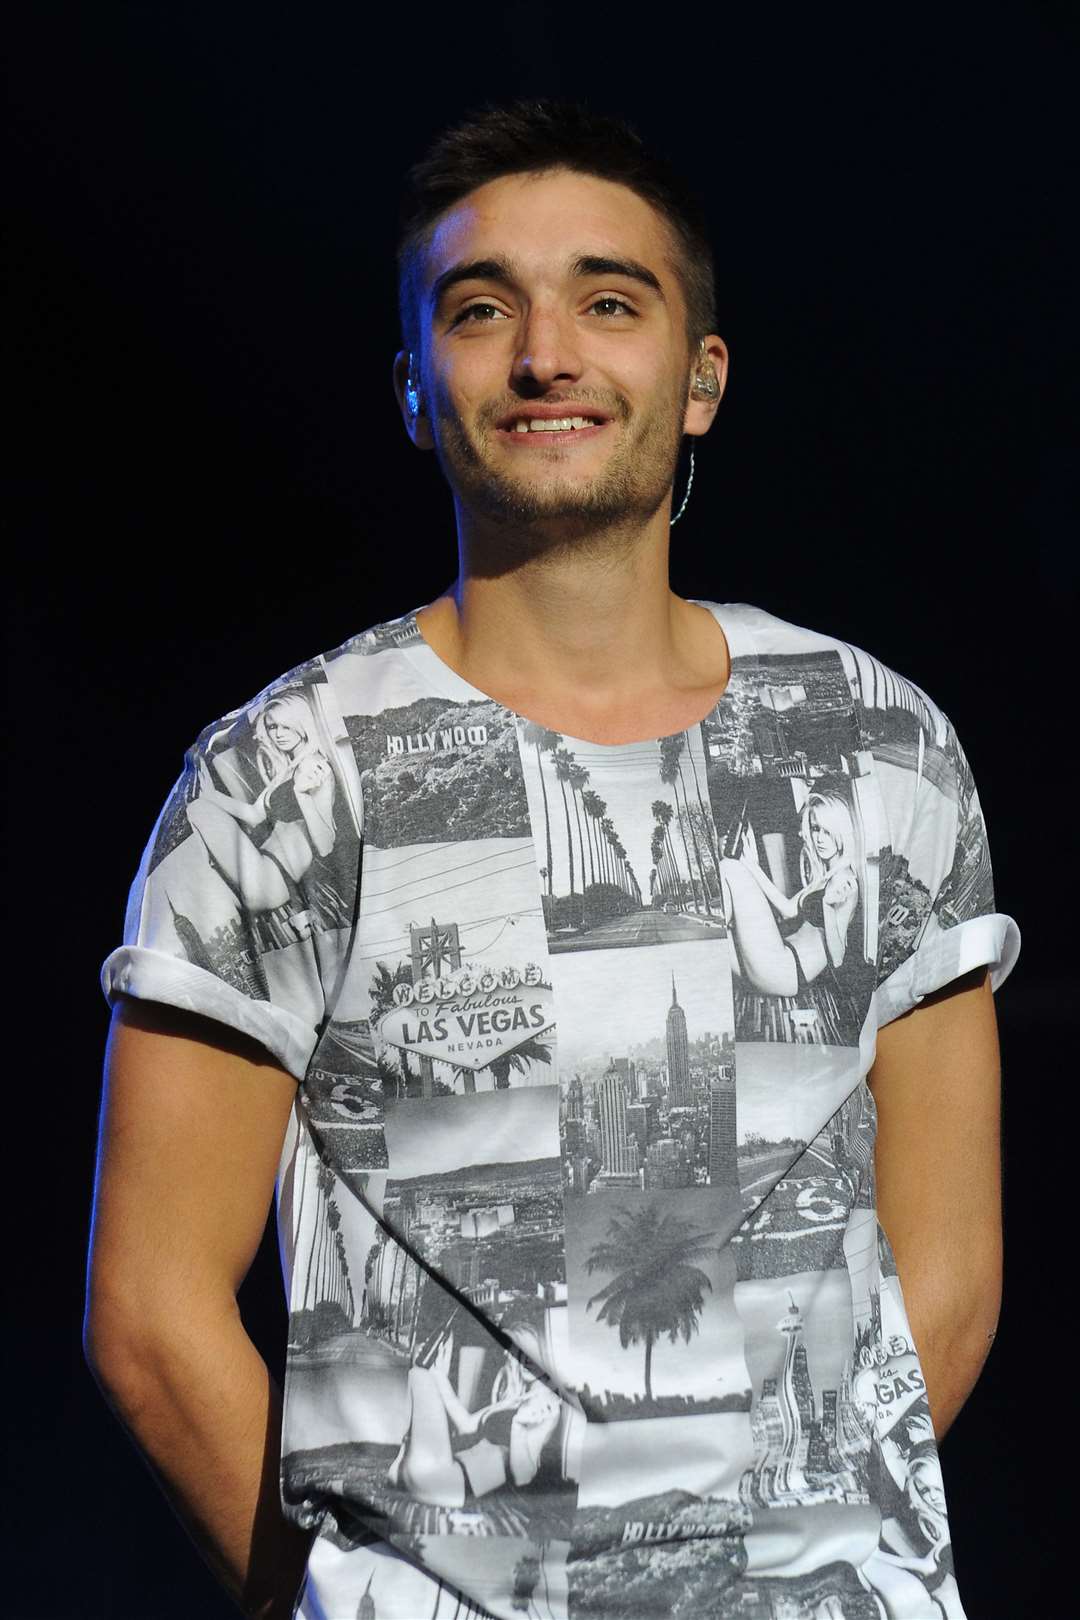 The Wanted’s Tom Parker died at the age of 33 after being diagnosed with an inoperable brain tumour (Joe Giddens/PA)